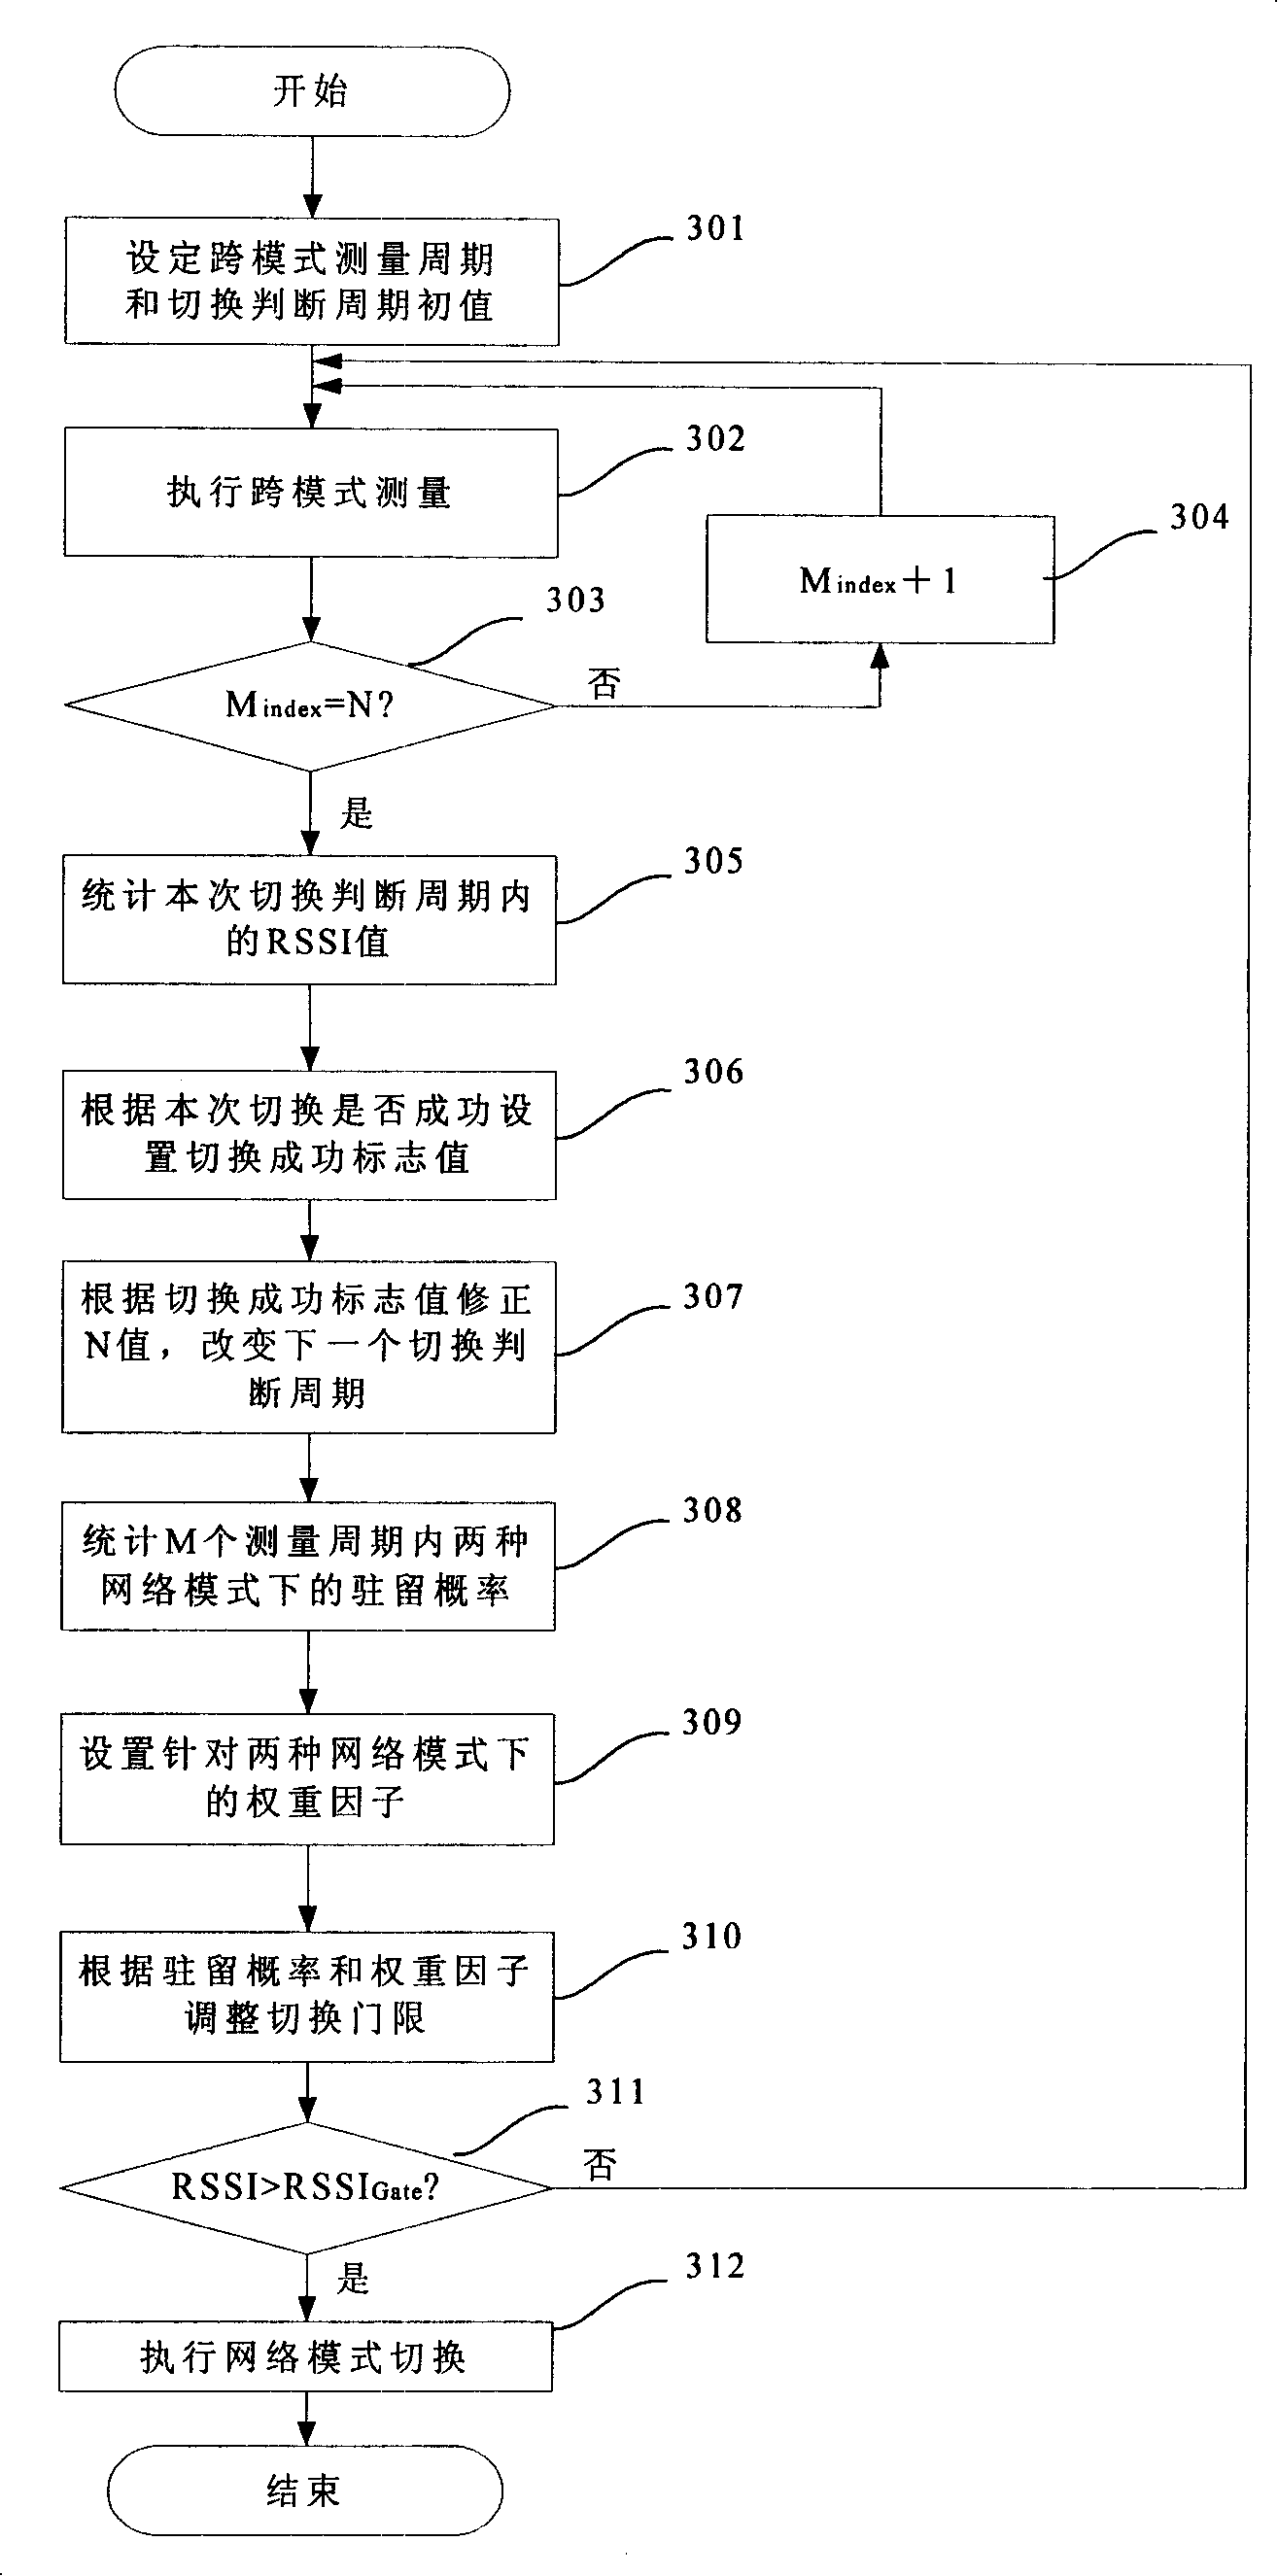 A multi-network mode switching method and its communication device